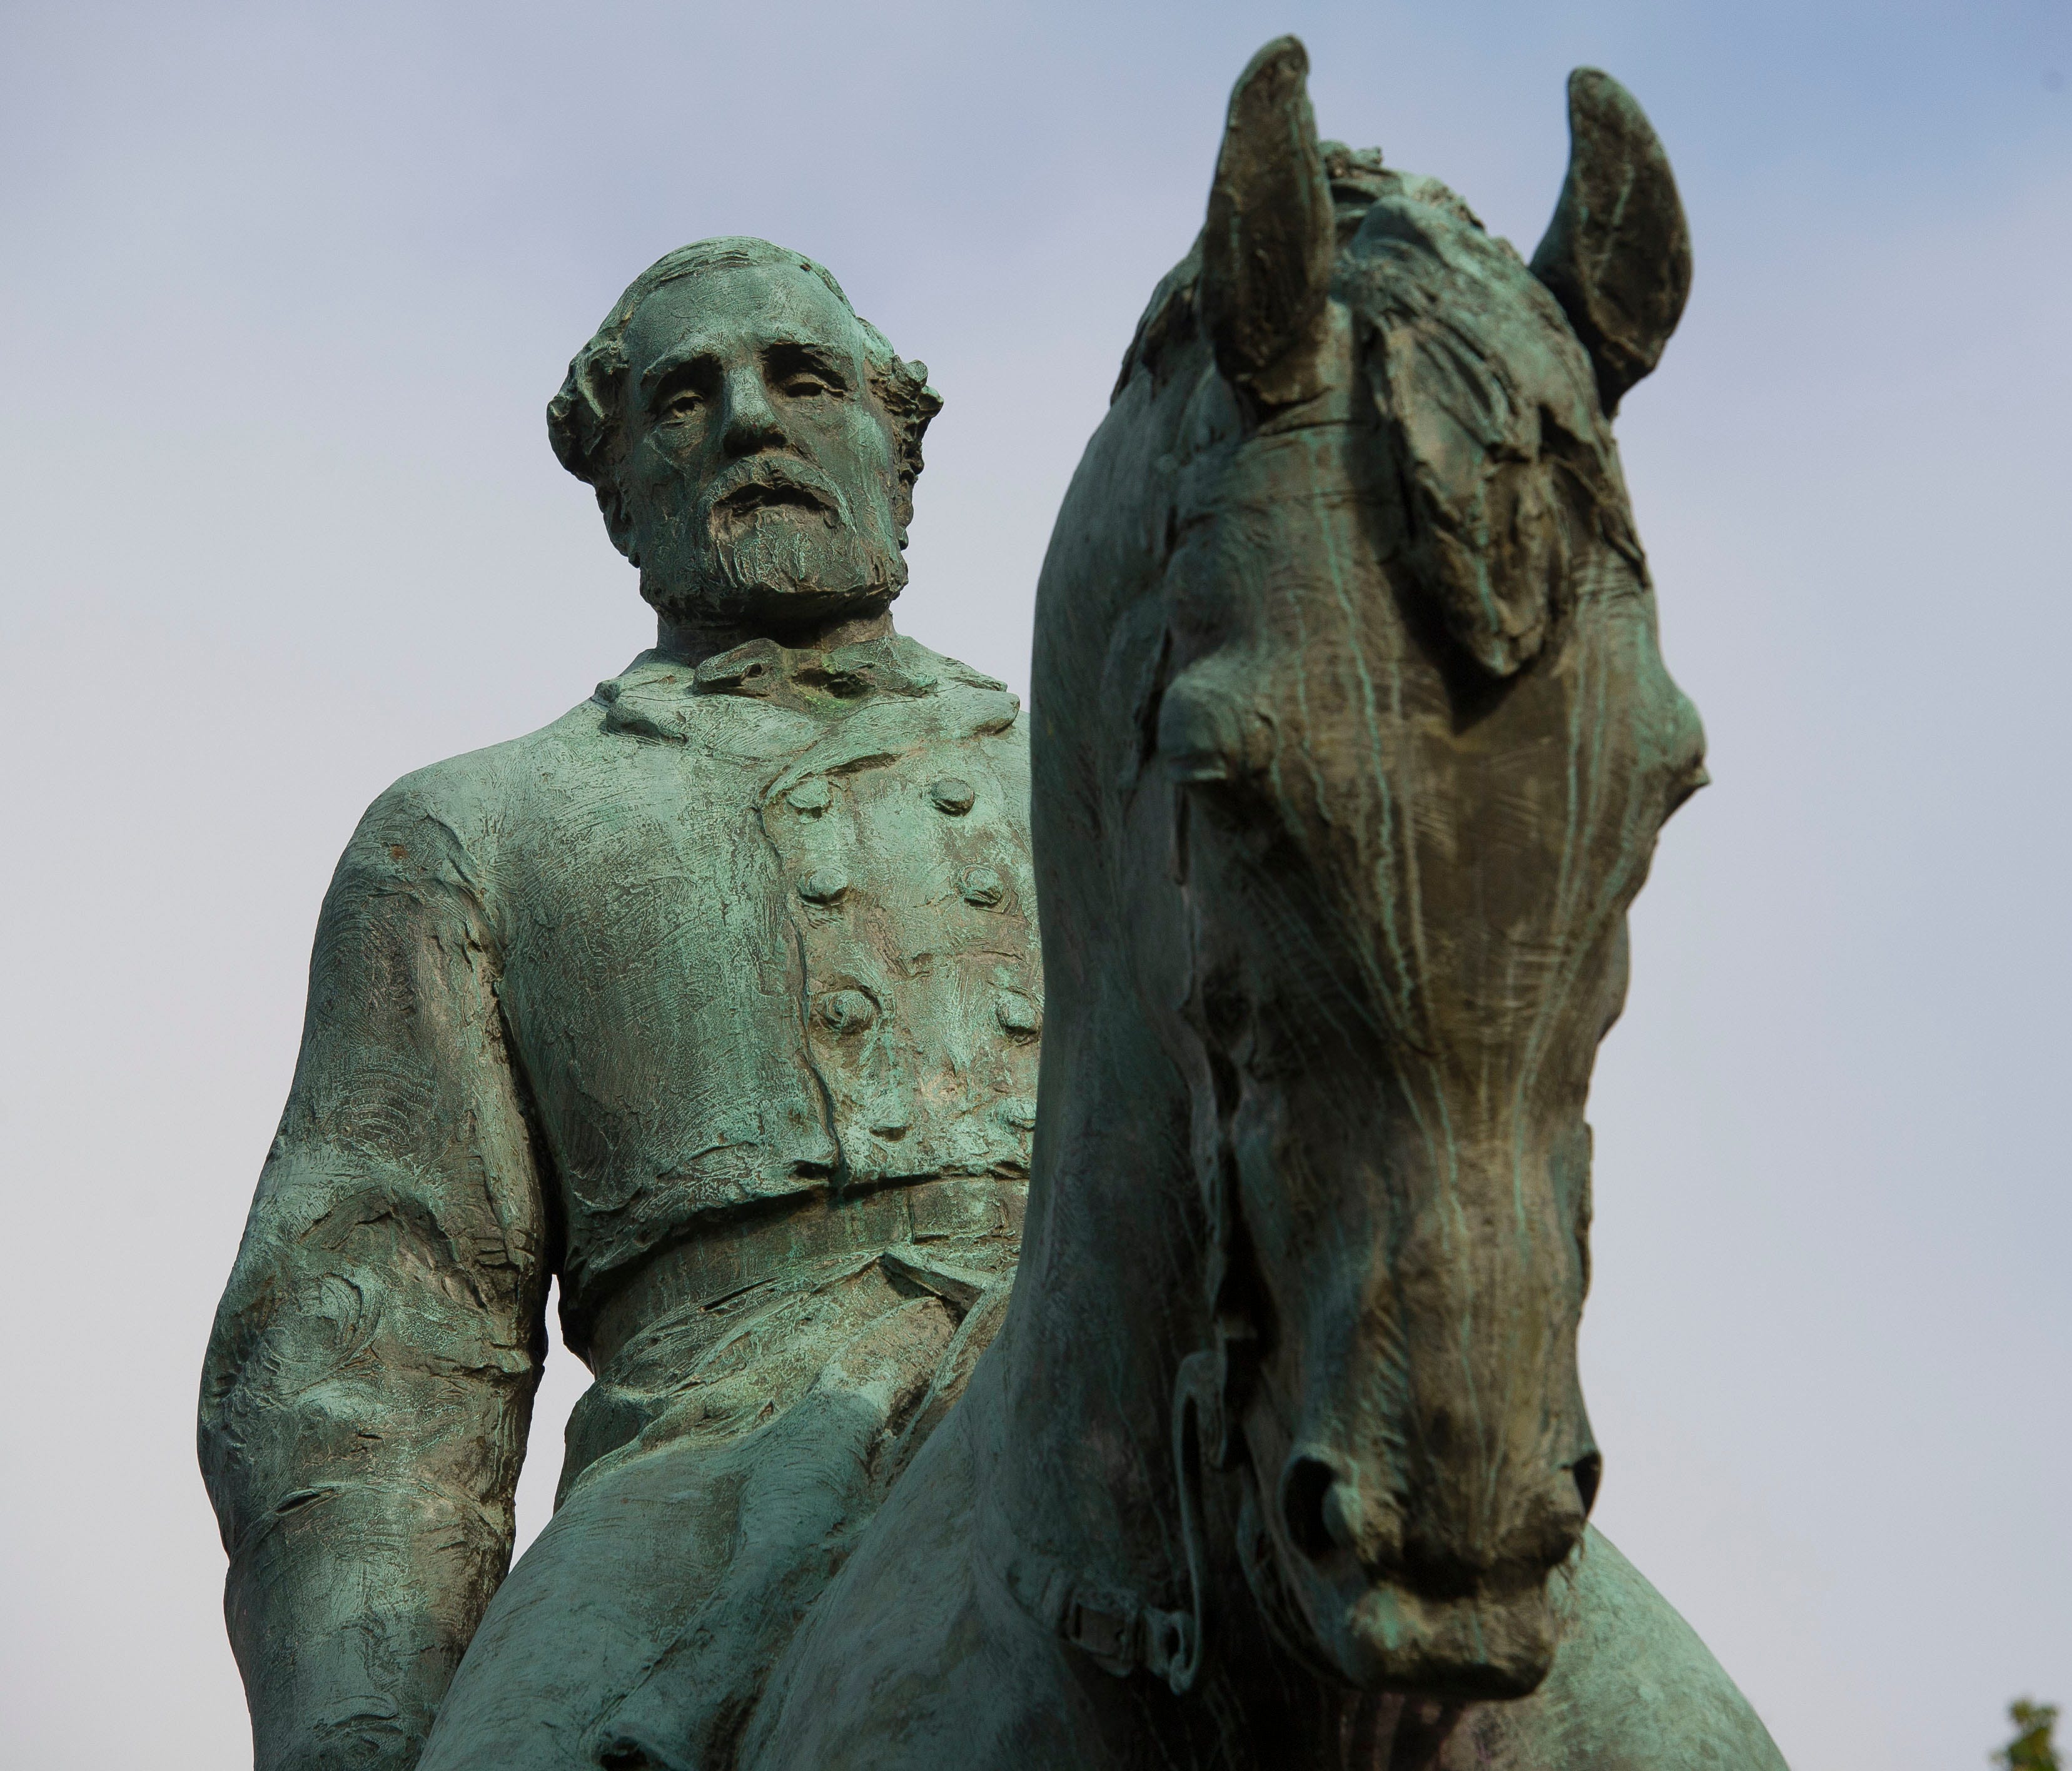 The statue of Robert E. Lee stands in Emancipation Park in Charlottesville, Va., on Aug. 18, 2017.